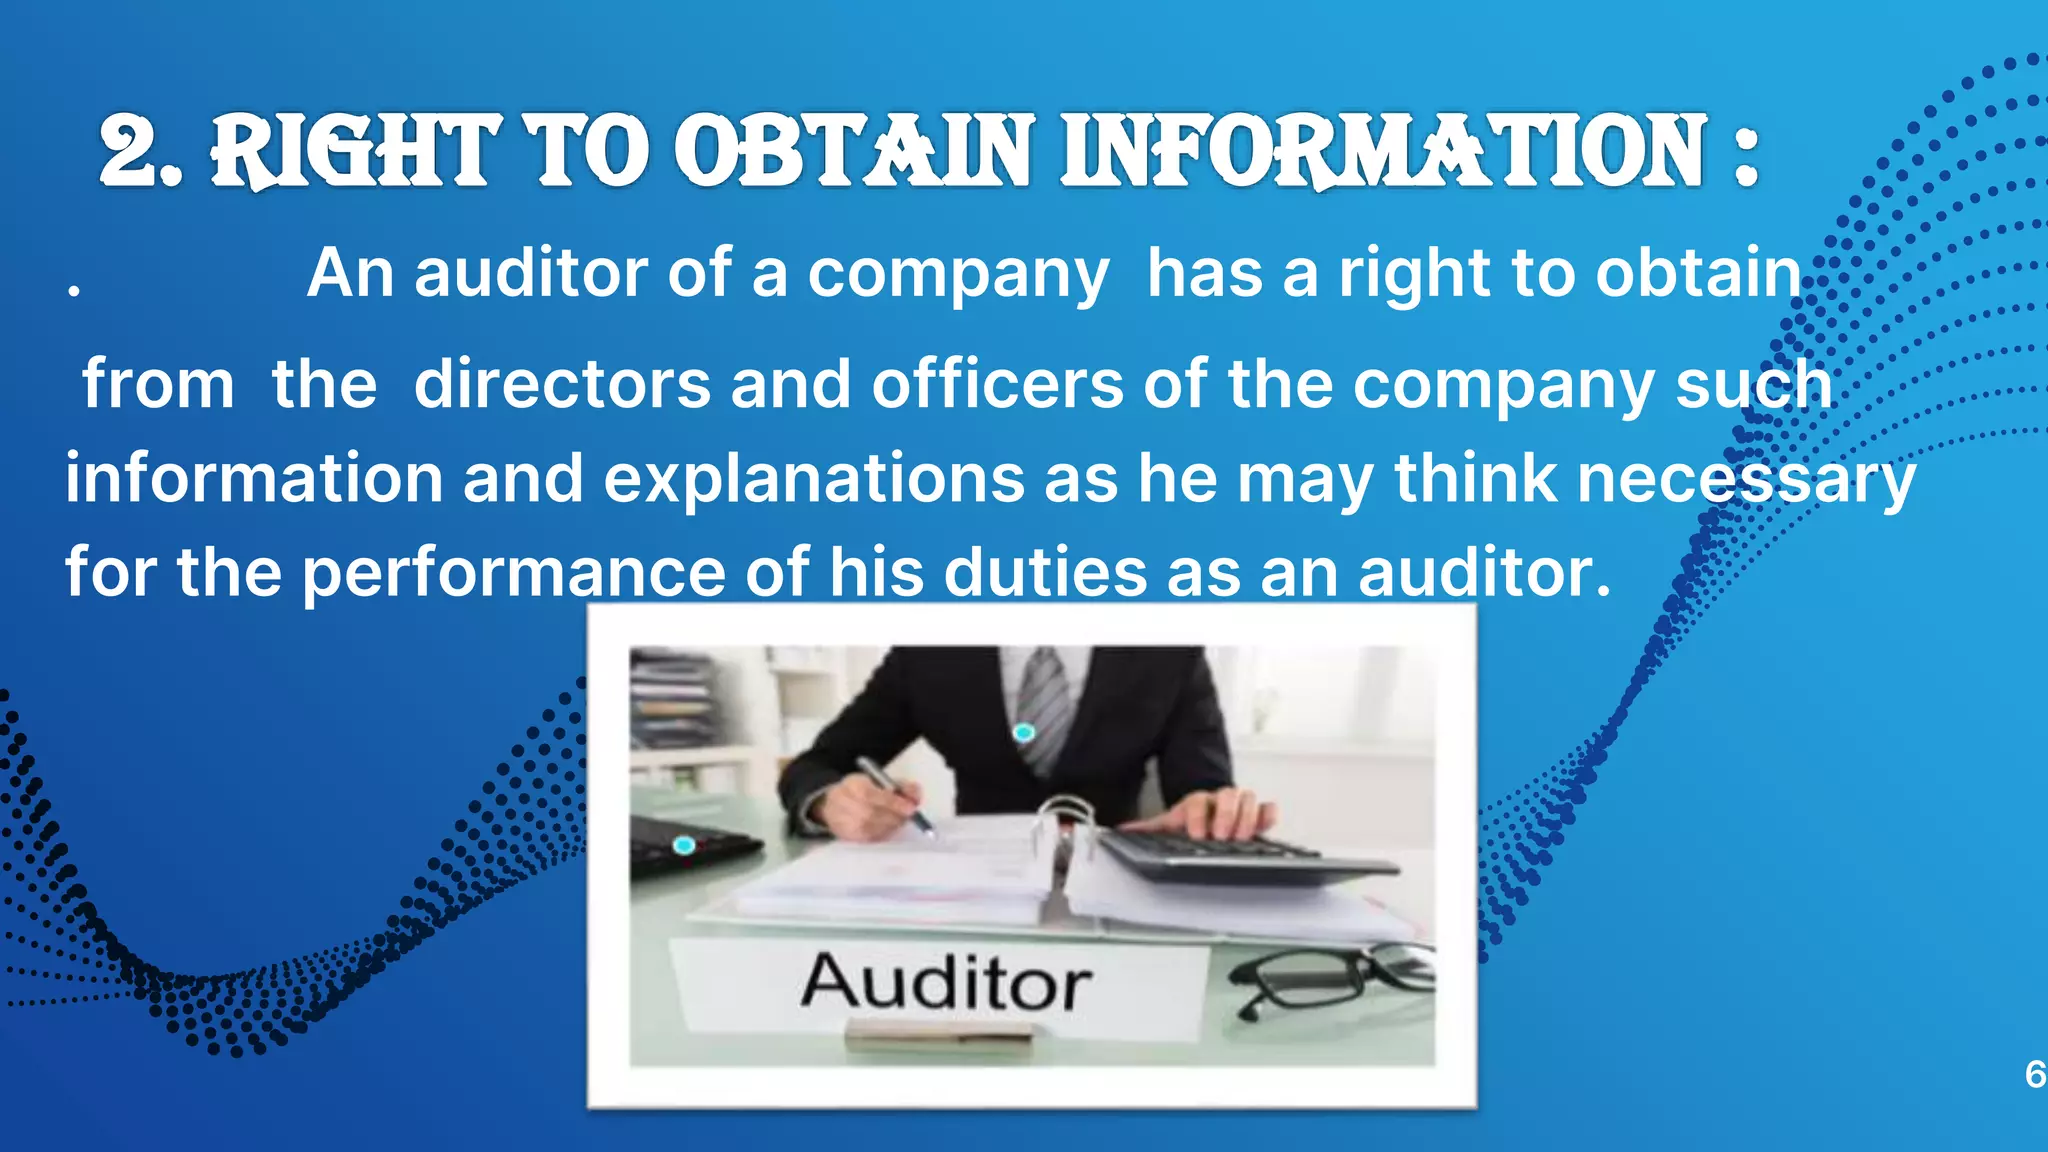 rights and duties of company auditor